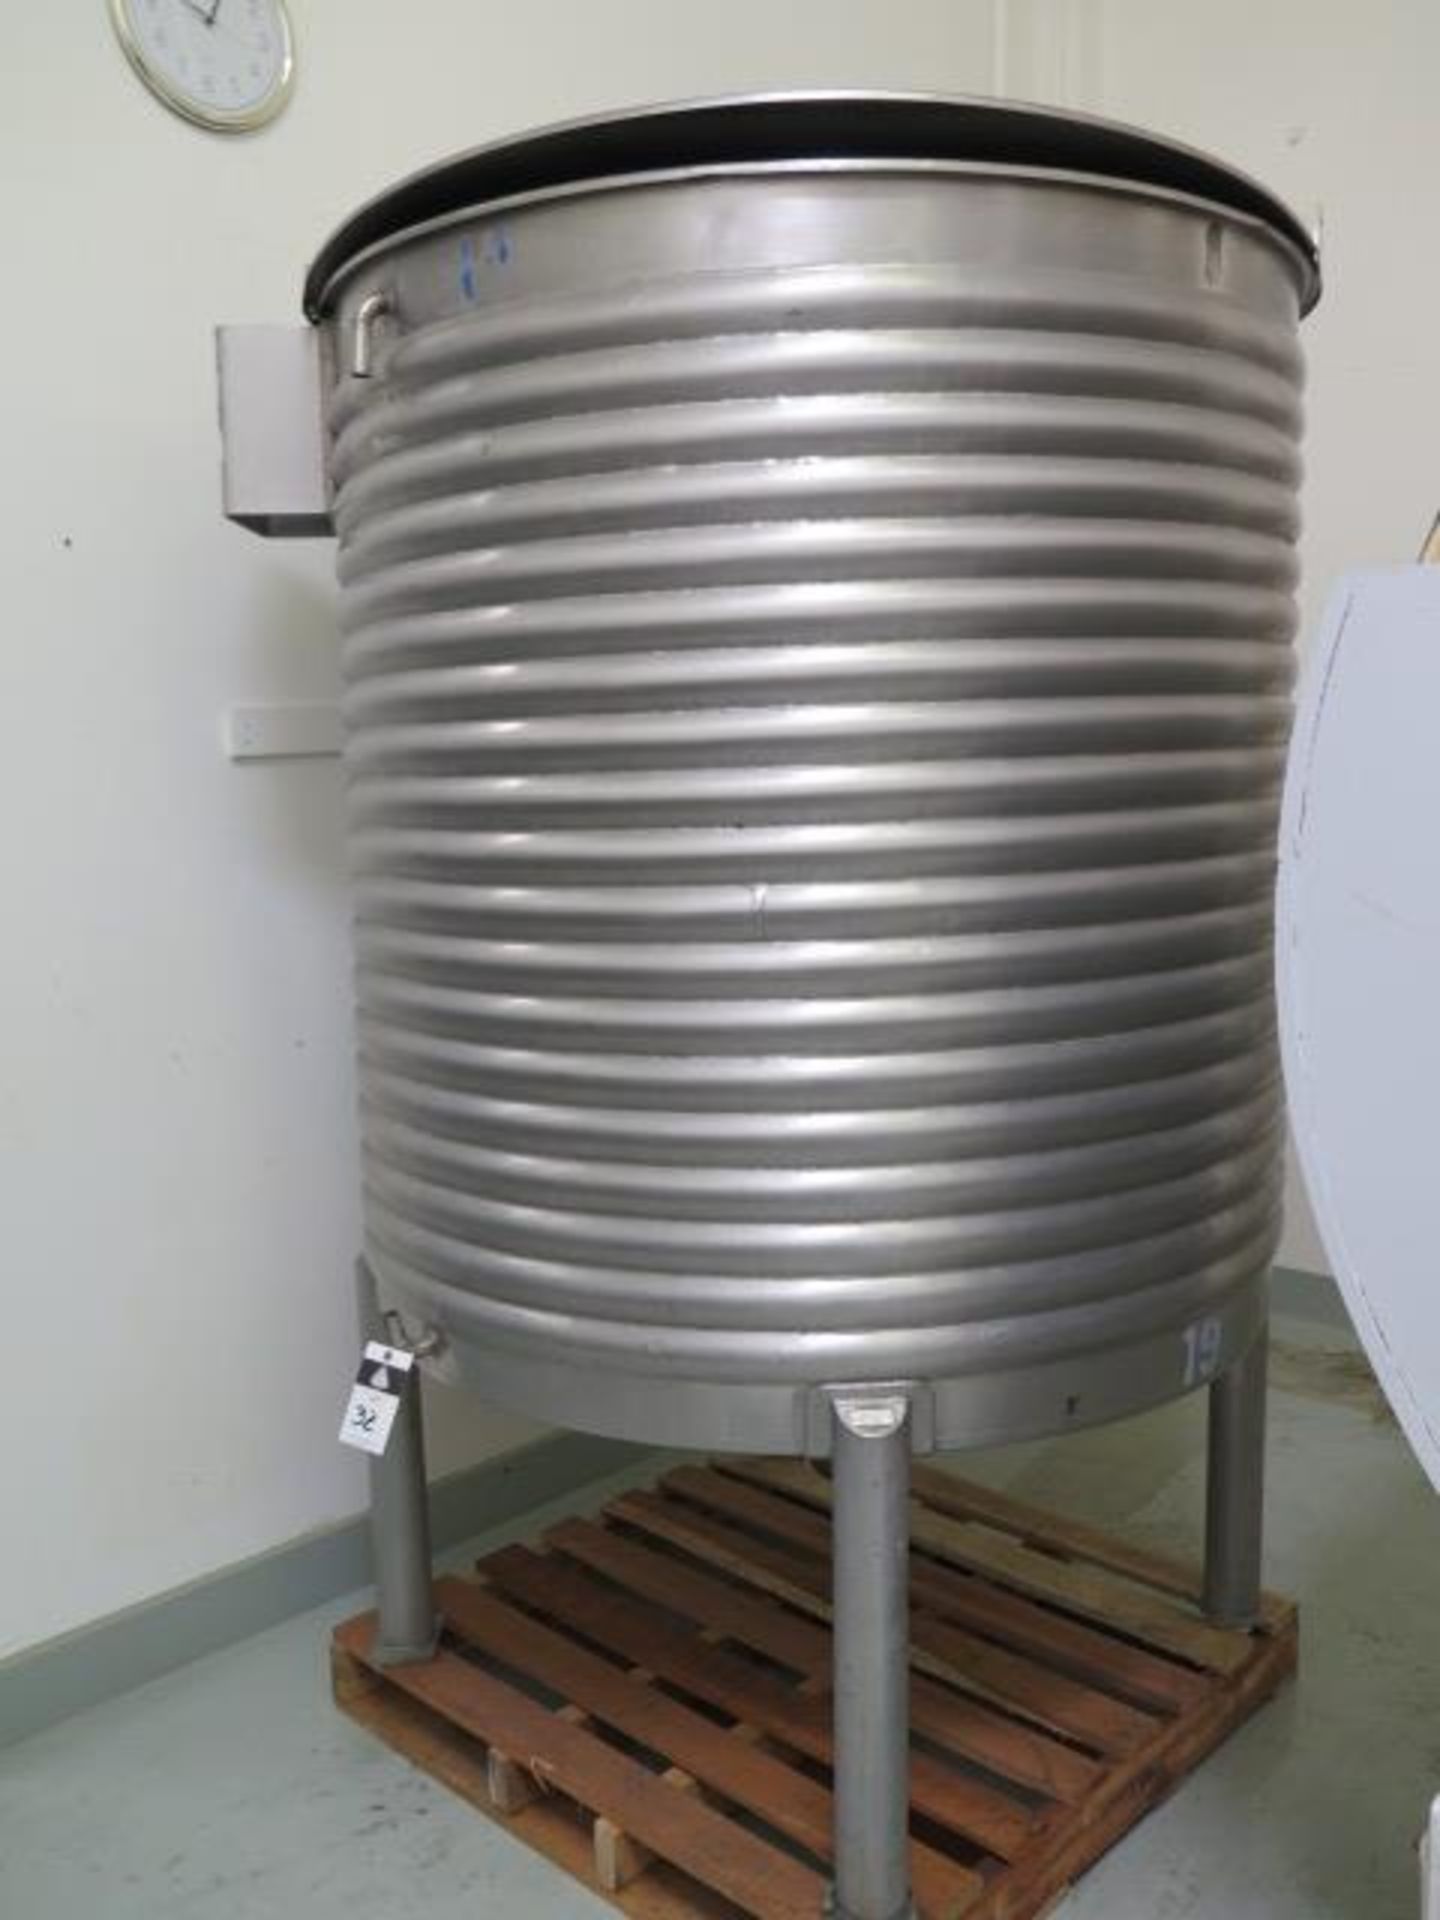 56” Dia x 56” H Jacketed (Coil Style) Stainless Steel Tank (SOLD AS-IS - NO WARRANTY)